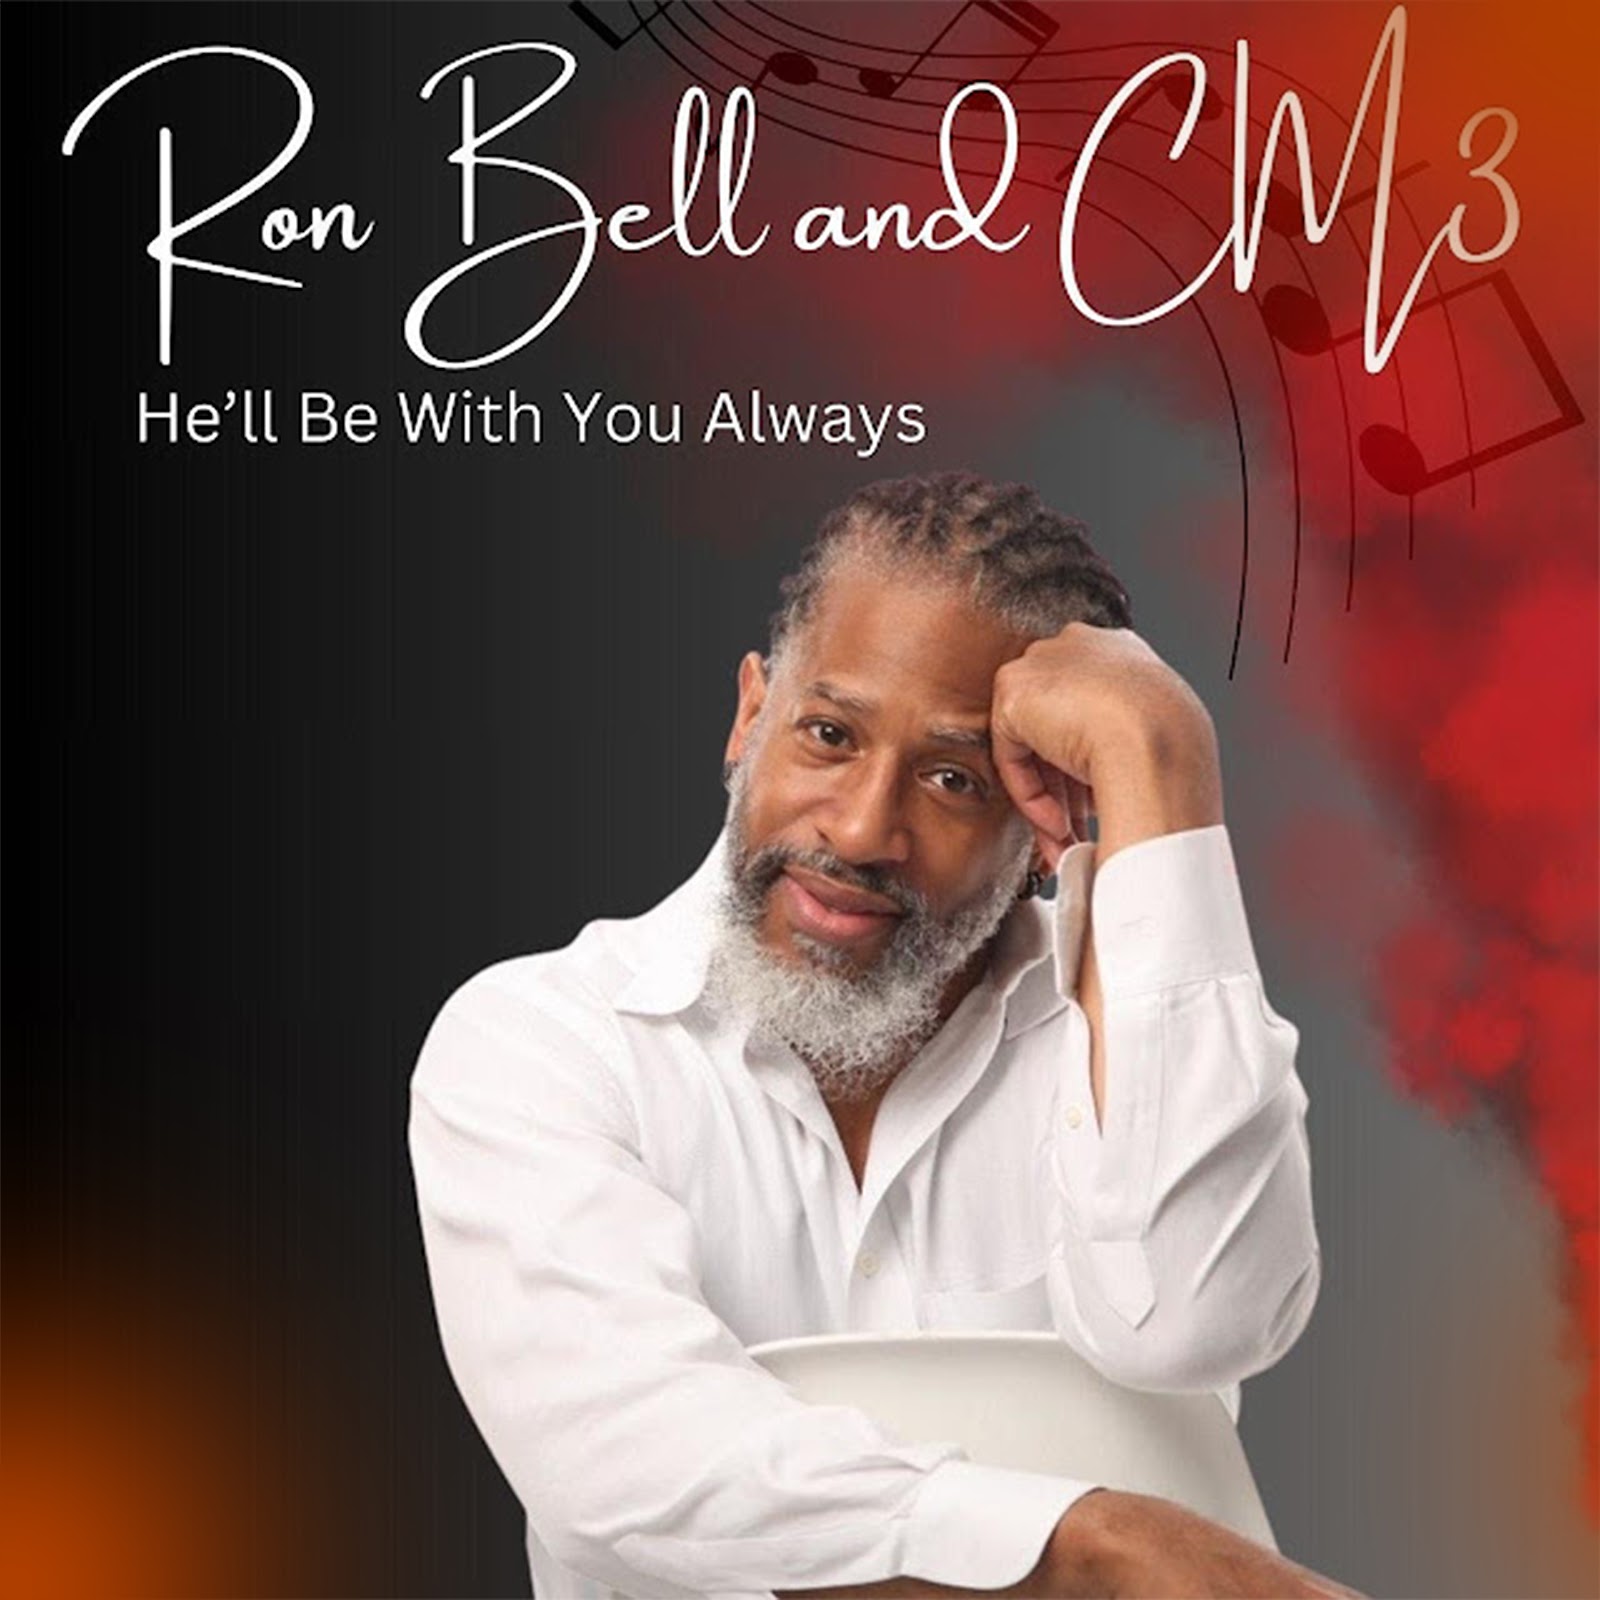 Ron Bell and CM3 Offer A Song Of Comfort, “He’ll Be With You Always” [Video]